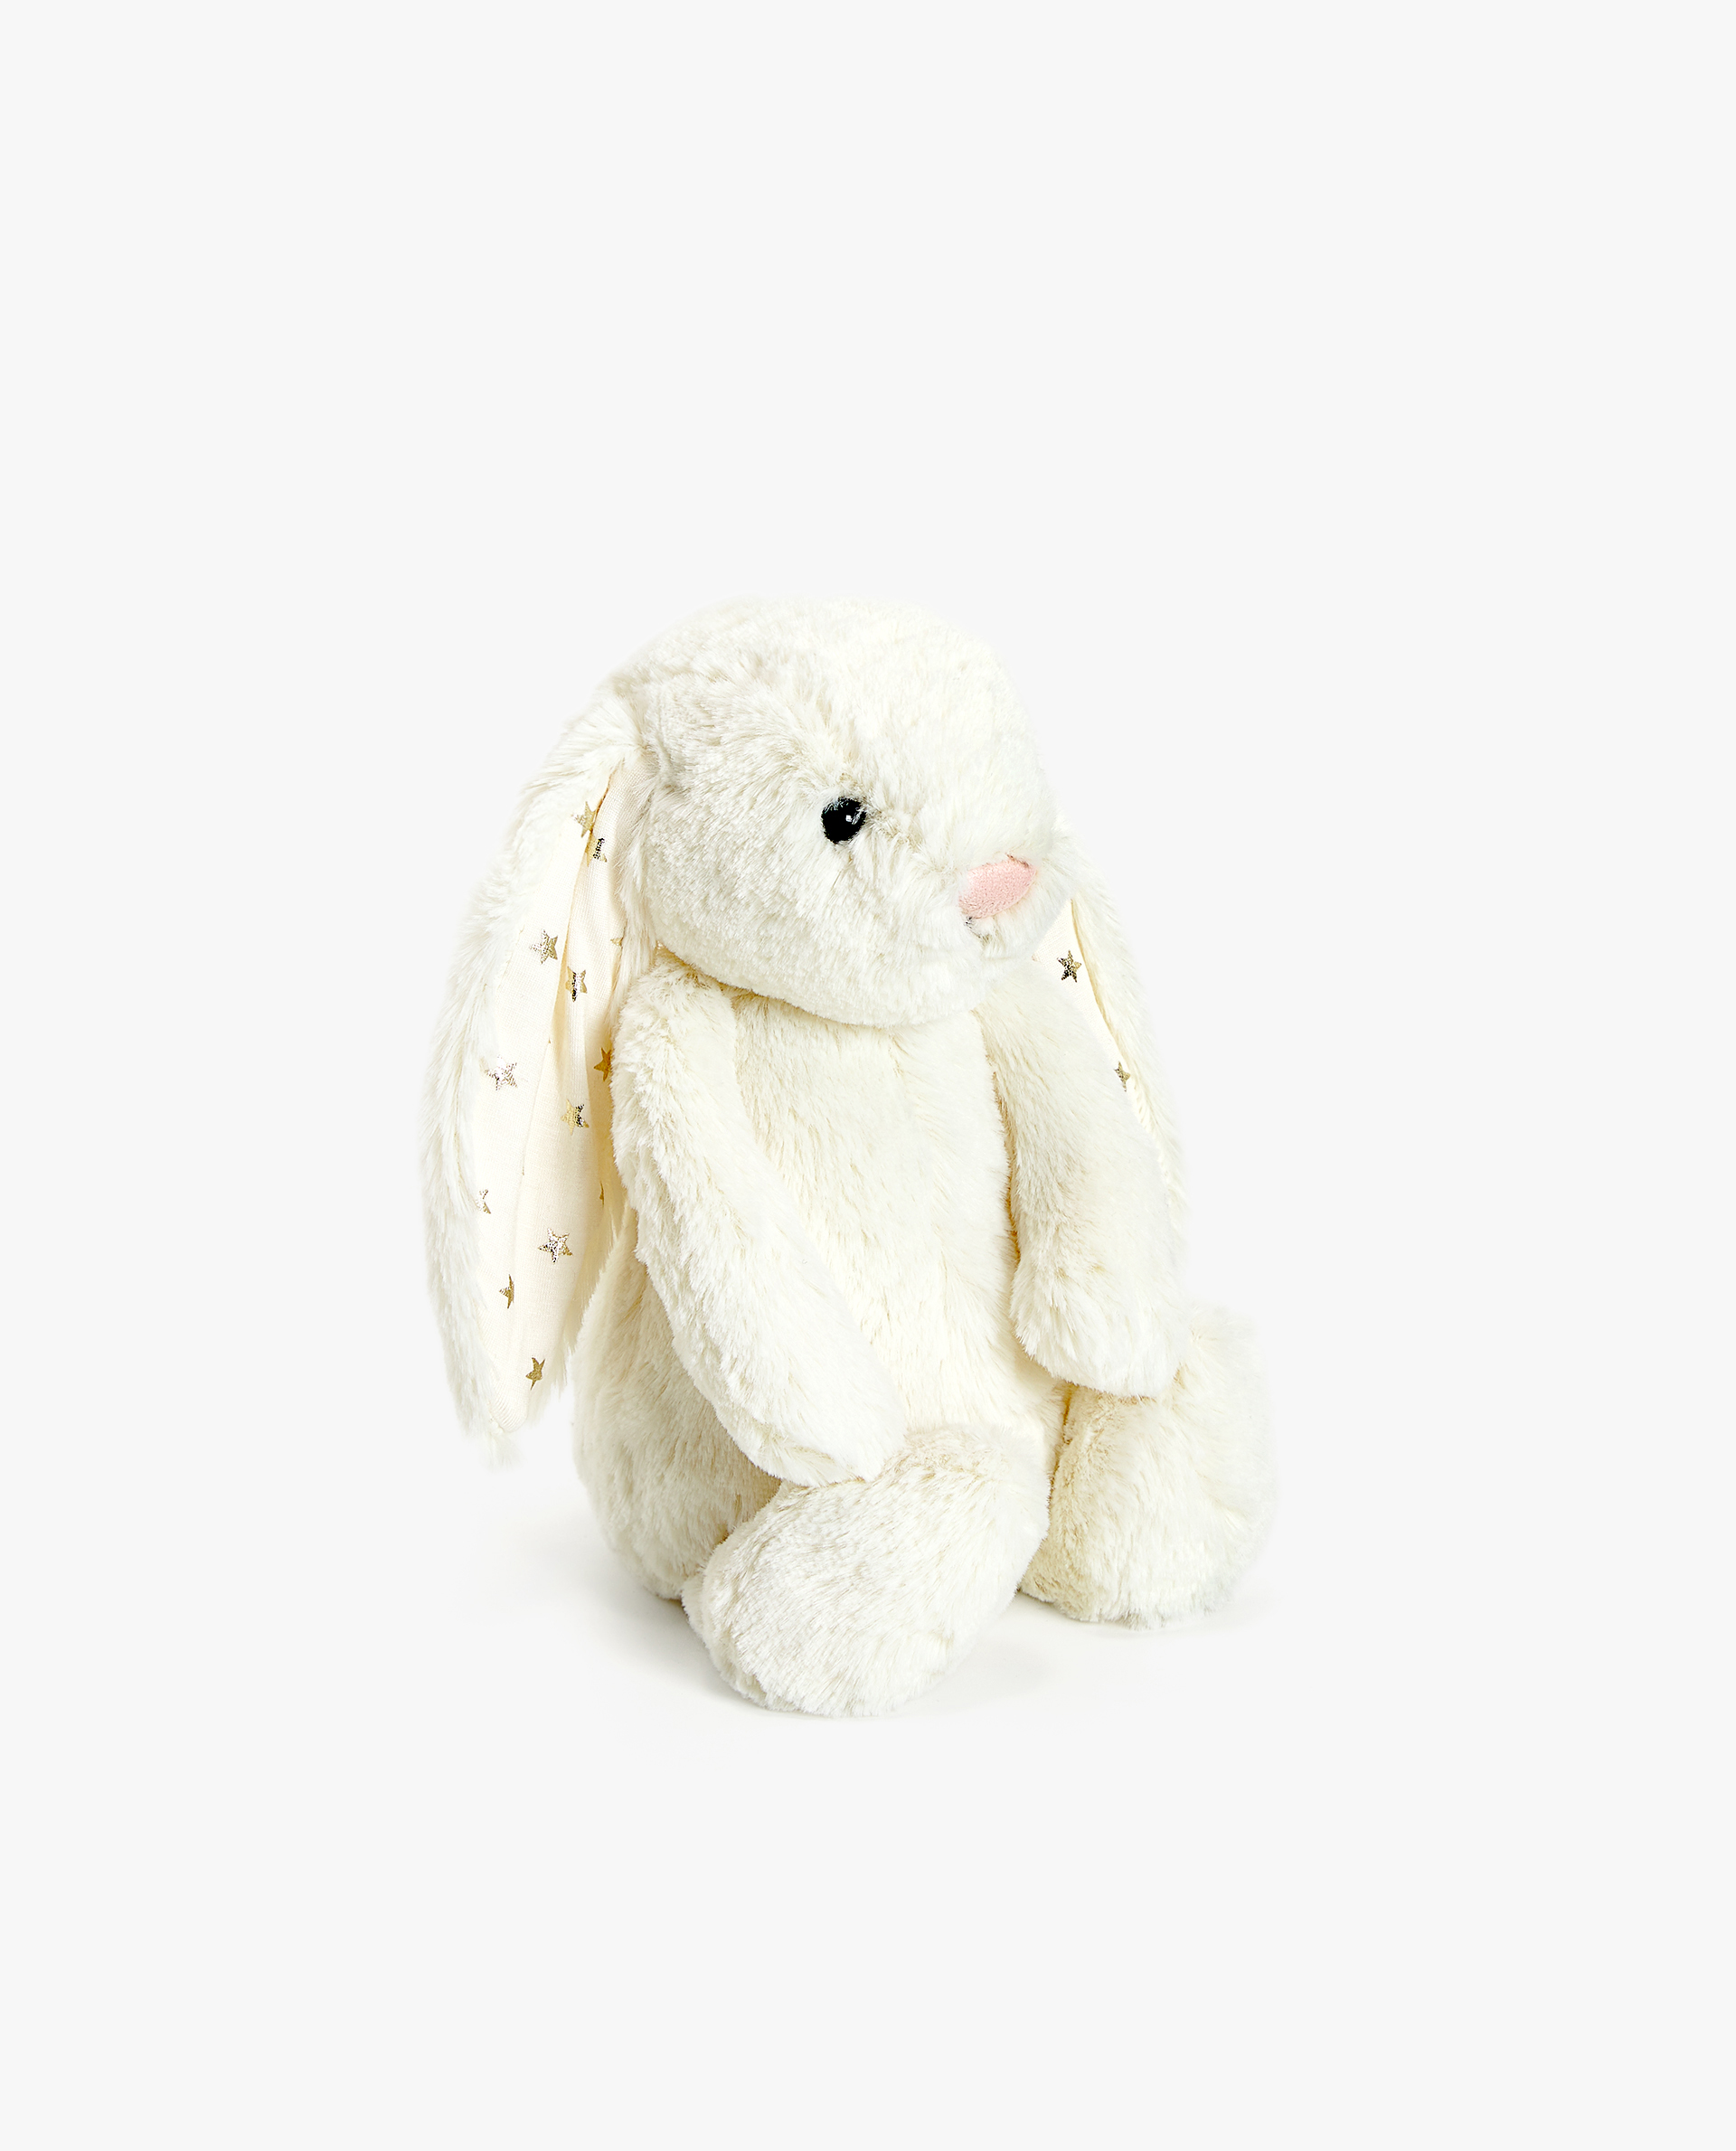 born in 2019 soft toy